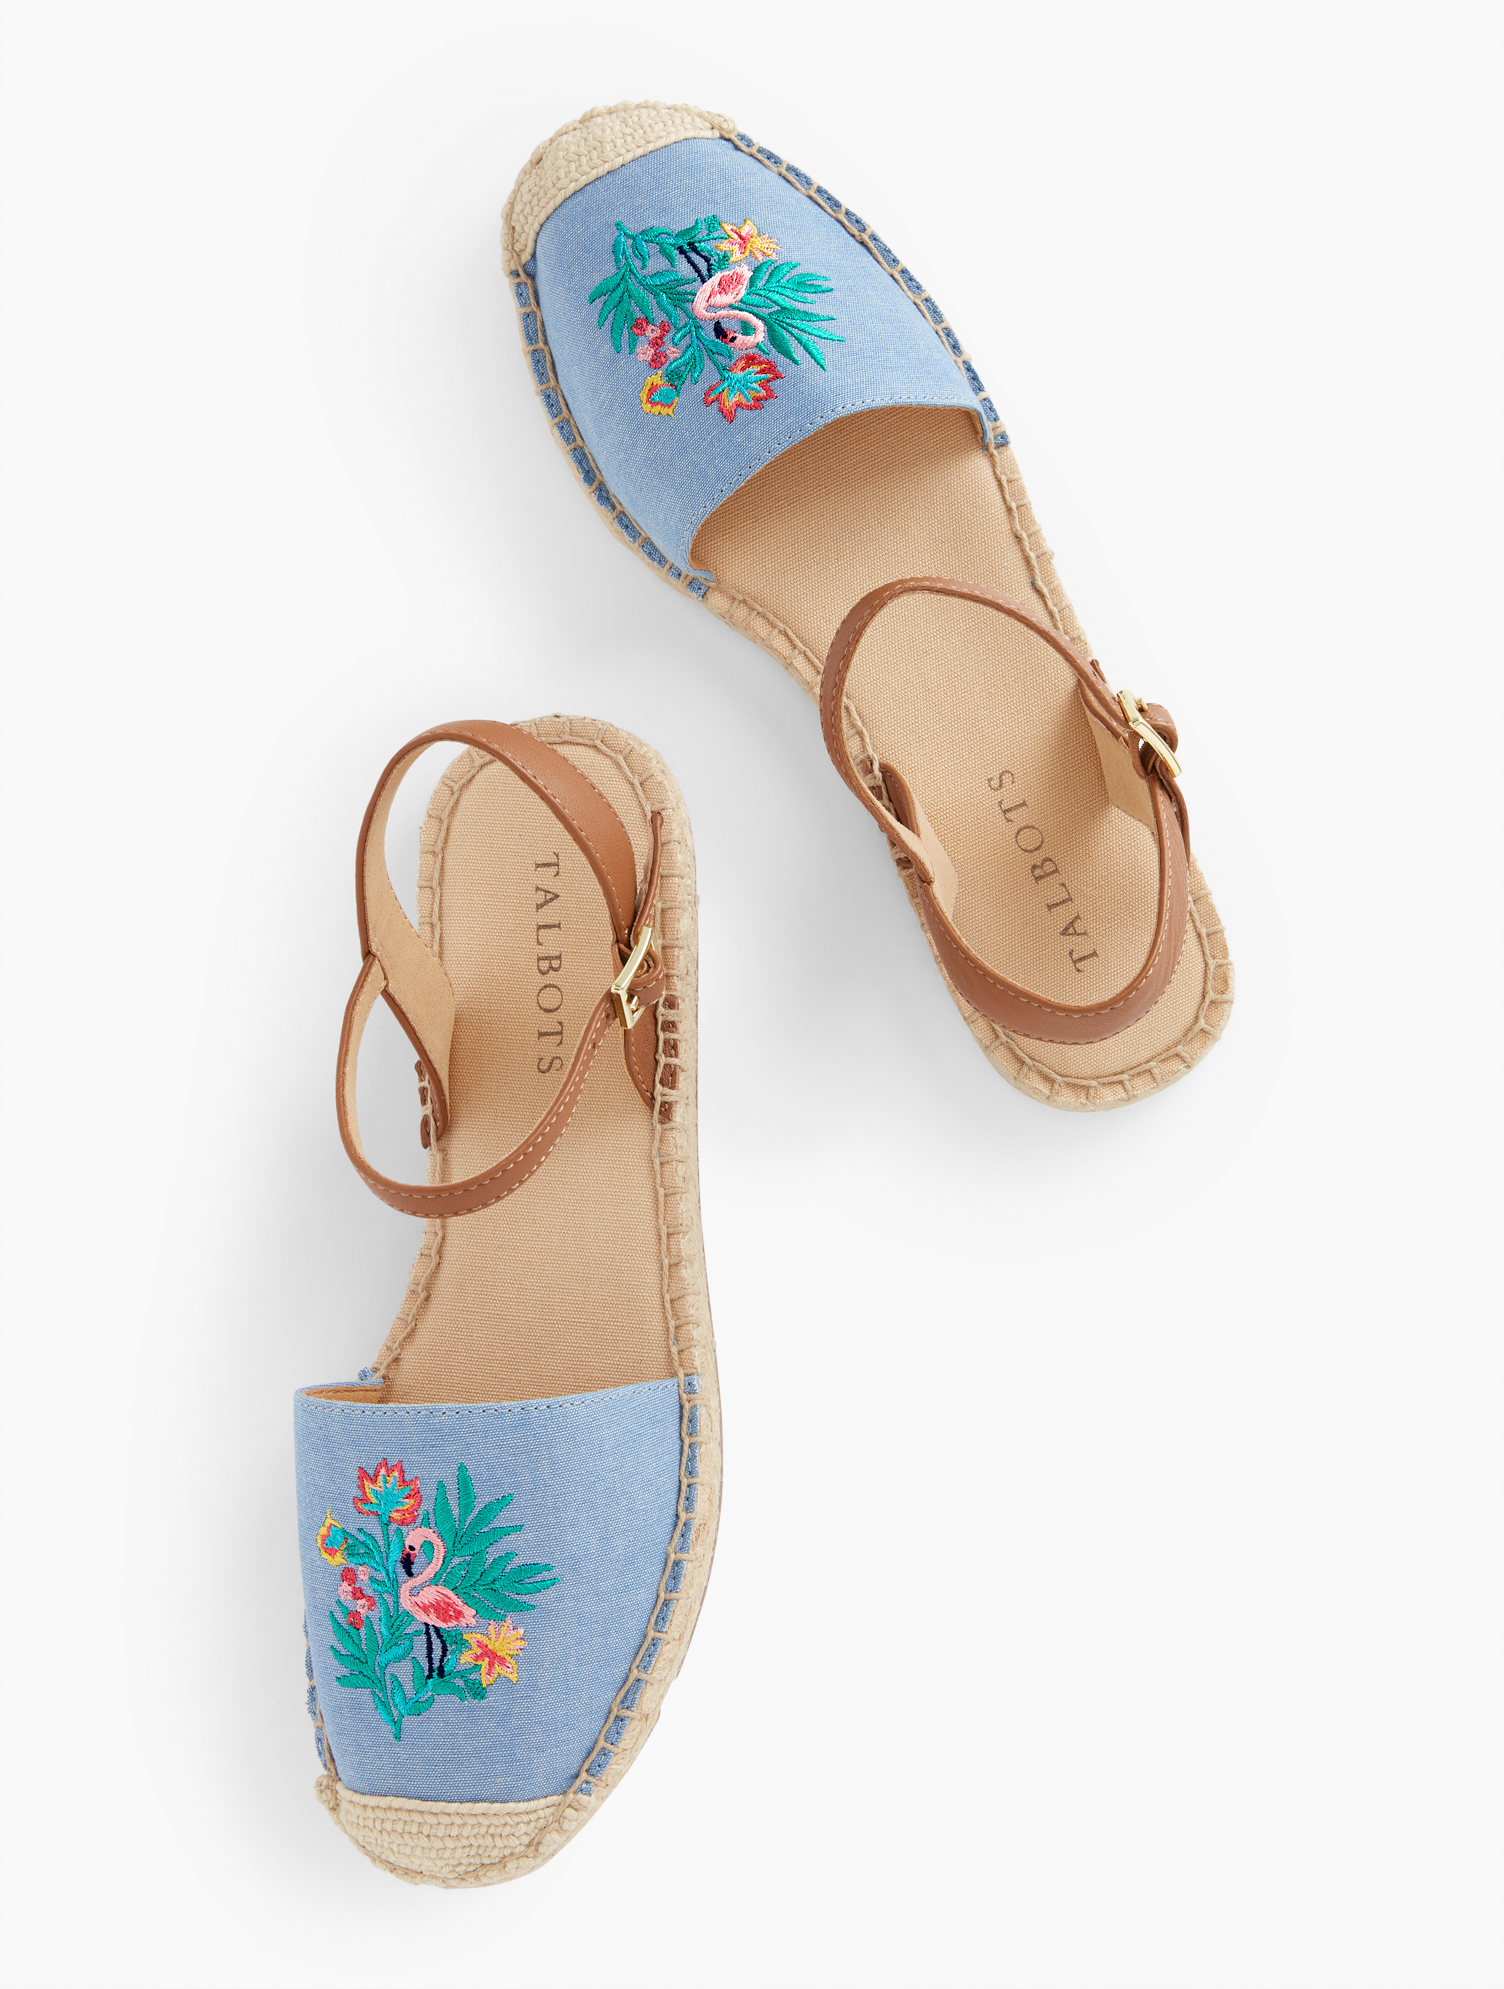 Talbots Izzy D'orsay Embroidered Chambray Espadrille Sandals - Light - 7 1/2 M - 100% Cotton  In Light Chambray